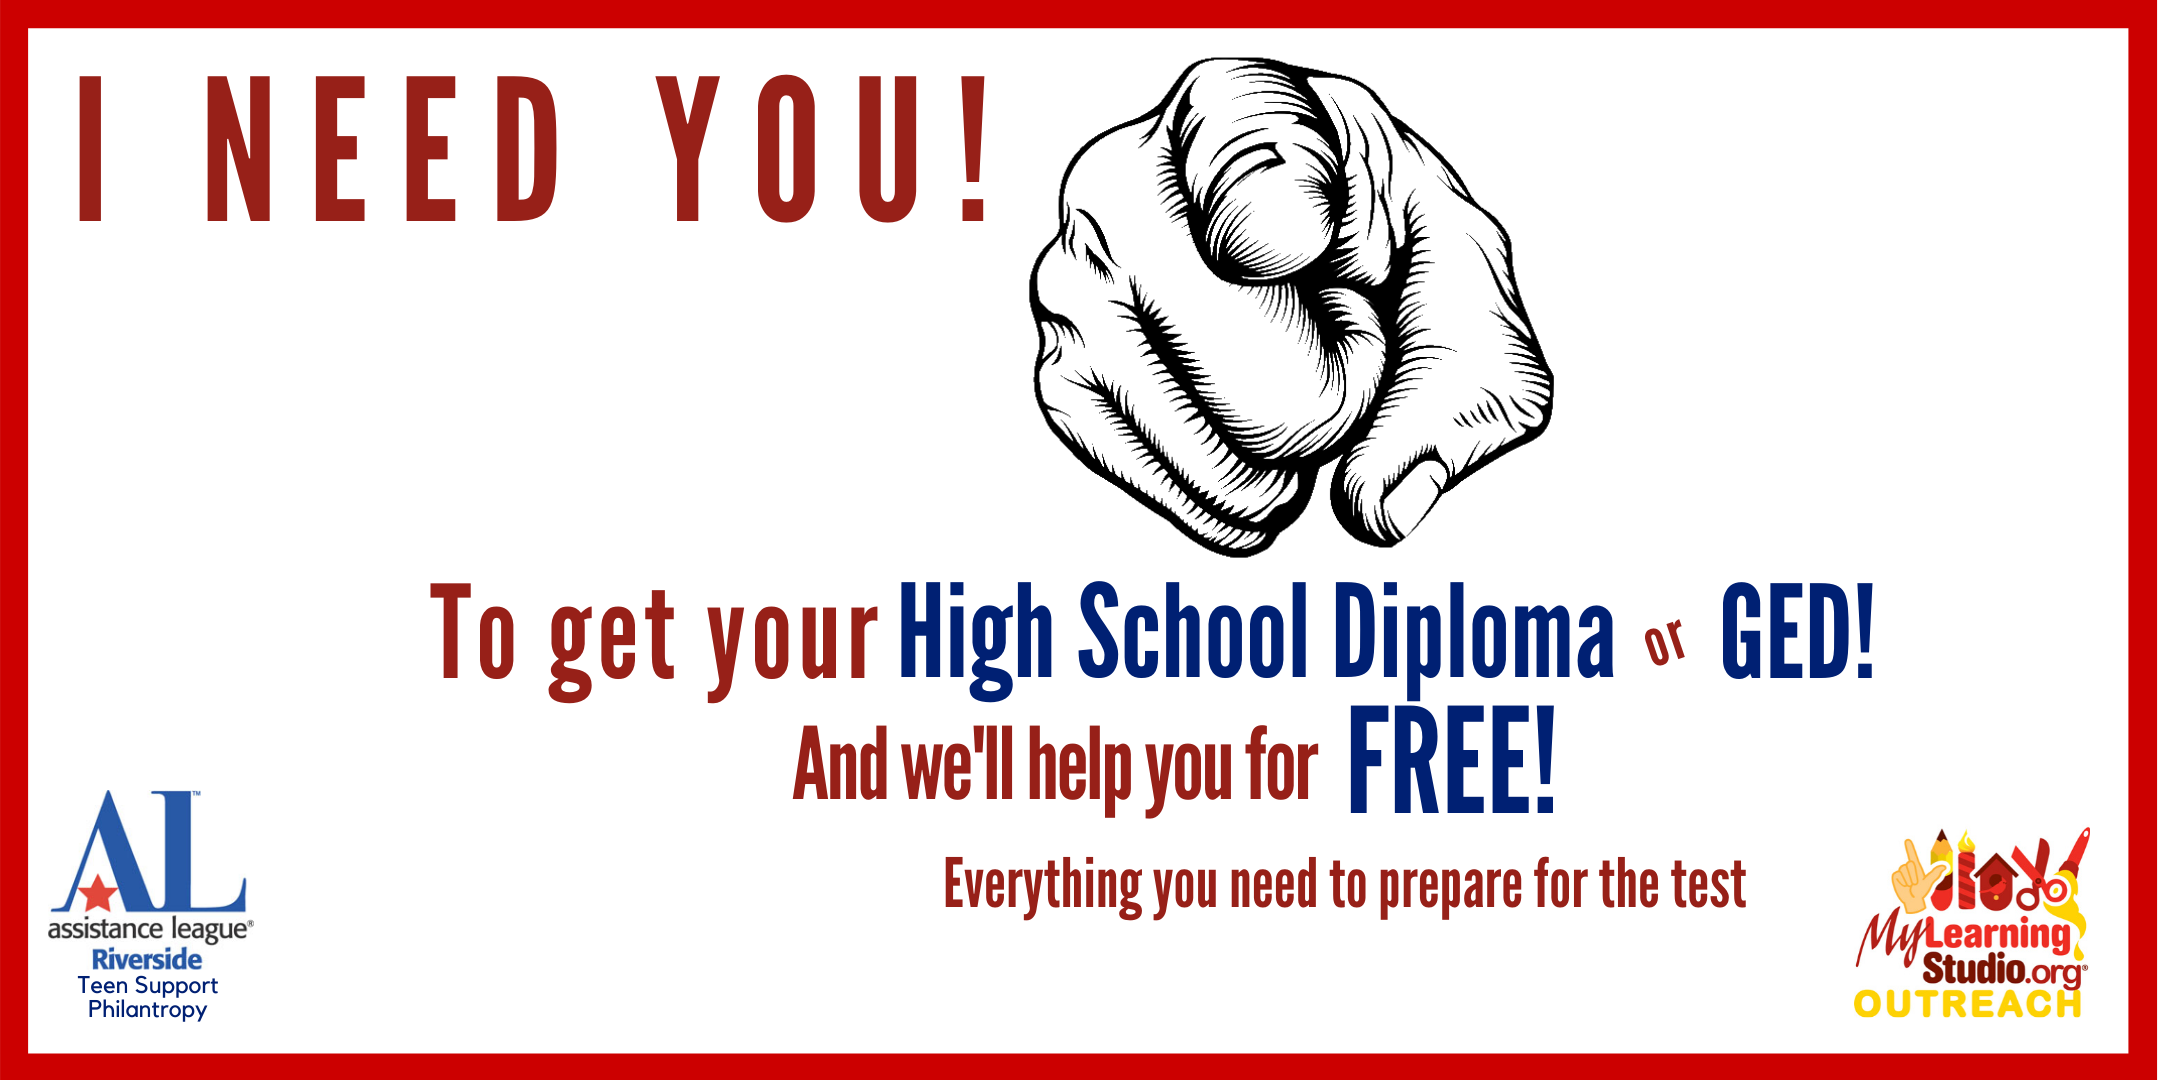 FREE Tutoring for High School Diploma or GED!